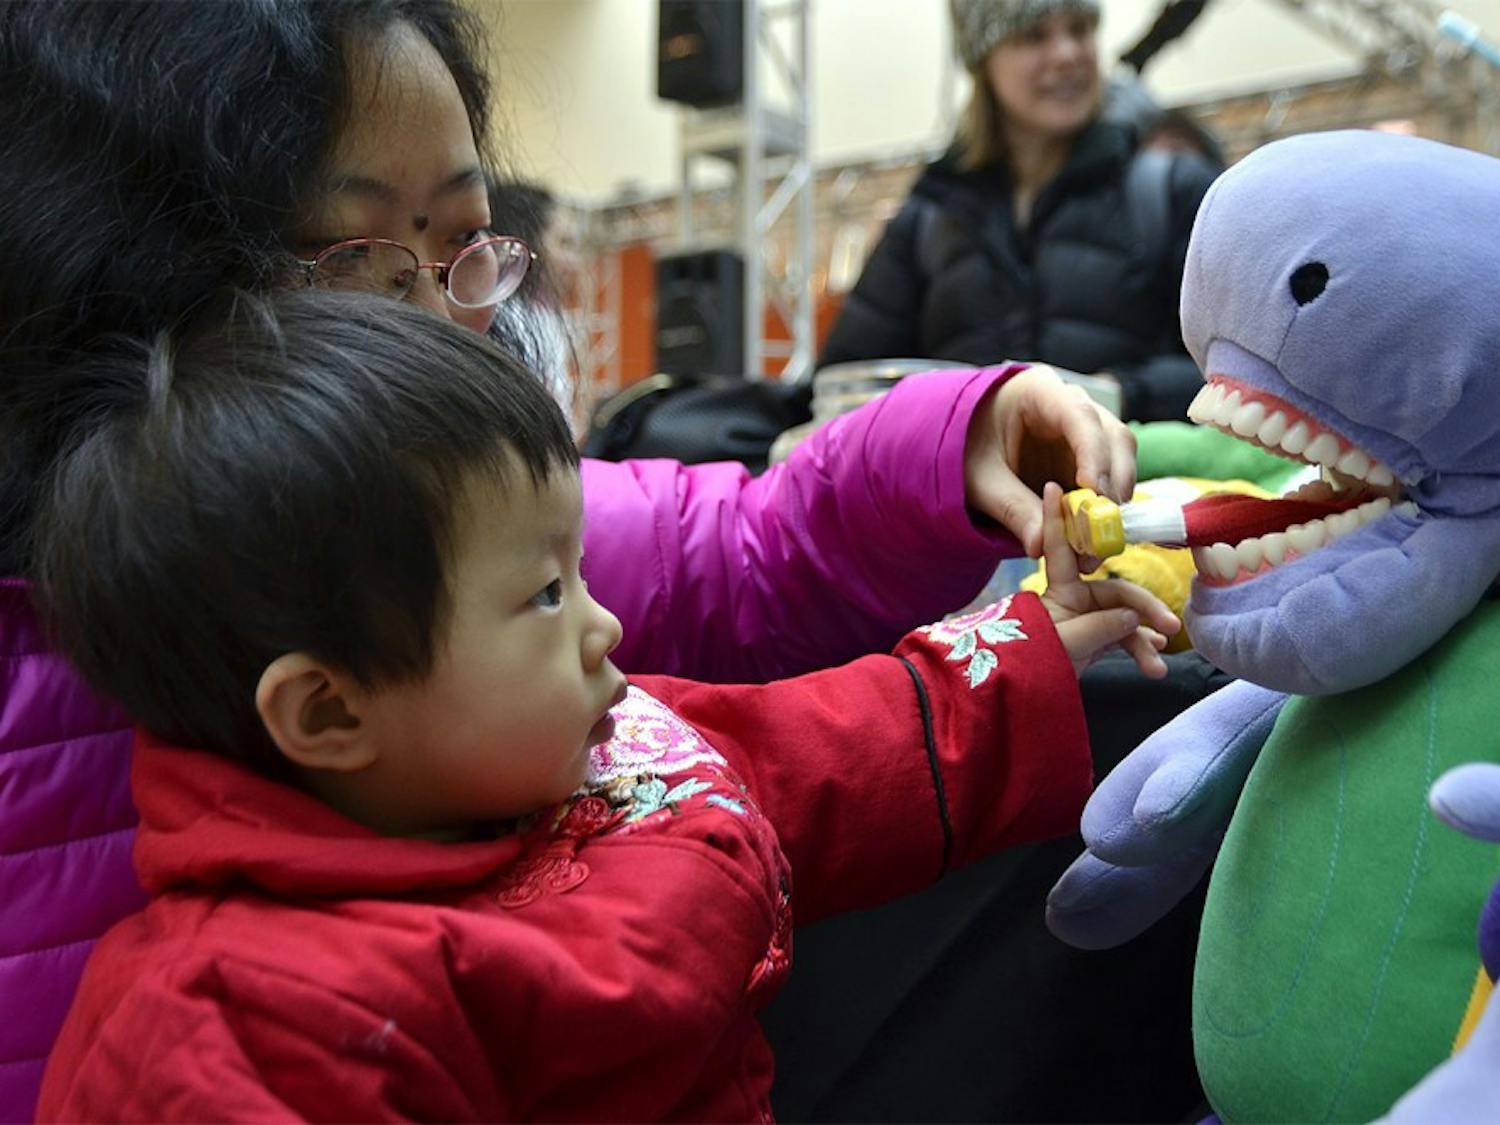 Kidzu Children's Museum partnered with Southern Village Pediatric Dentistry for an event at University Mall on Saturday morning. Carolina K. Wu, 24 months, practices her brushing skills on a stuffed dinosaur.